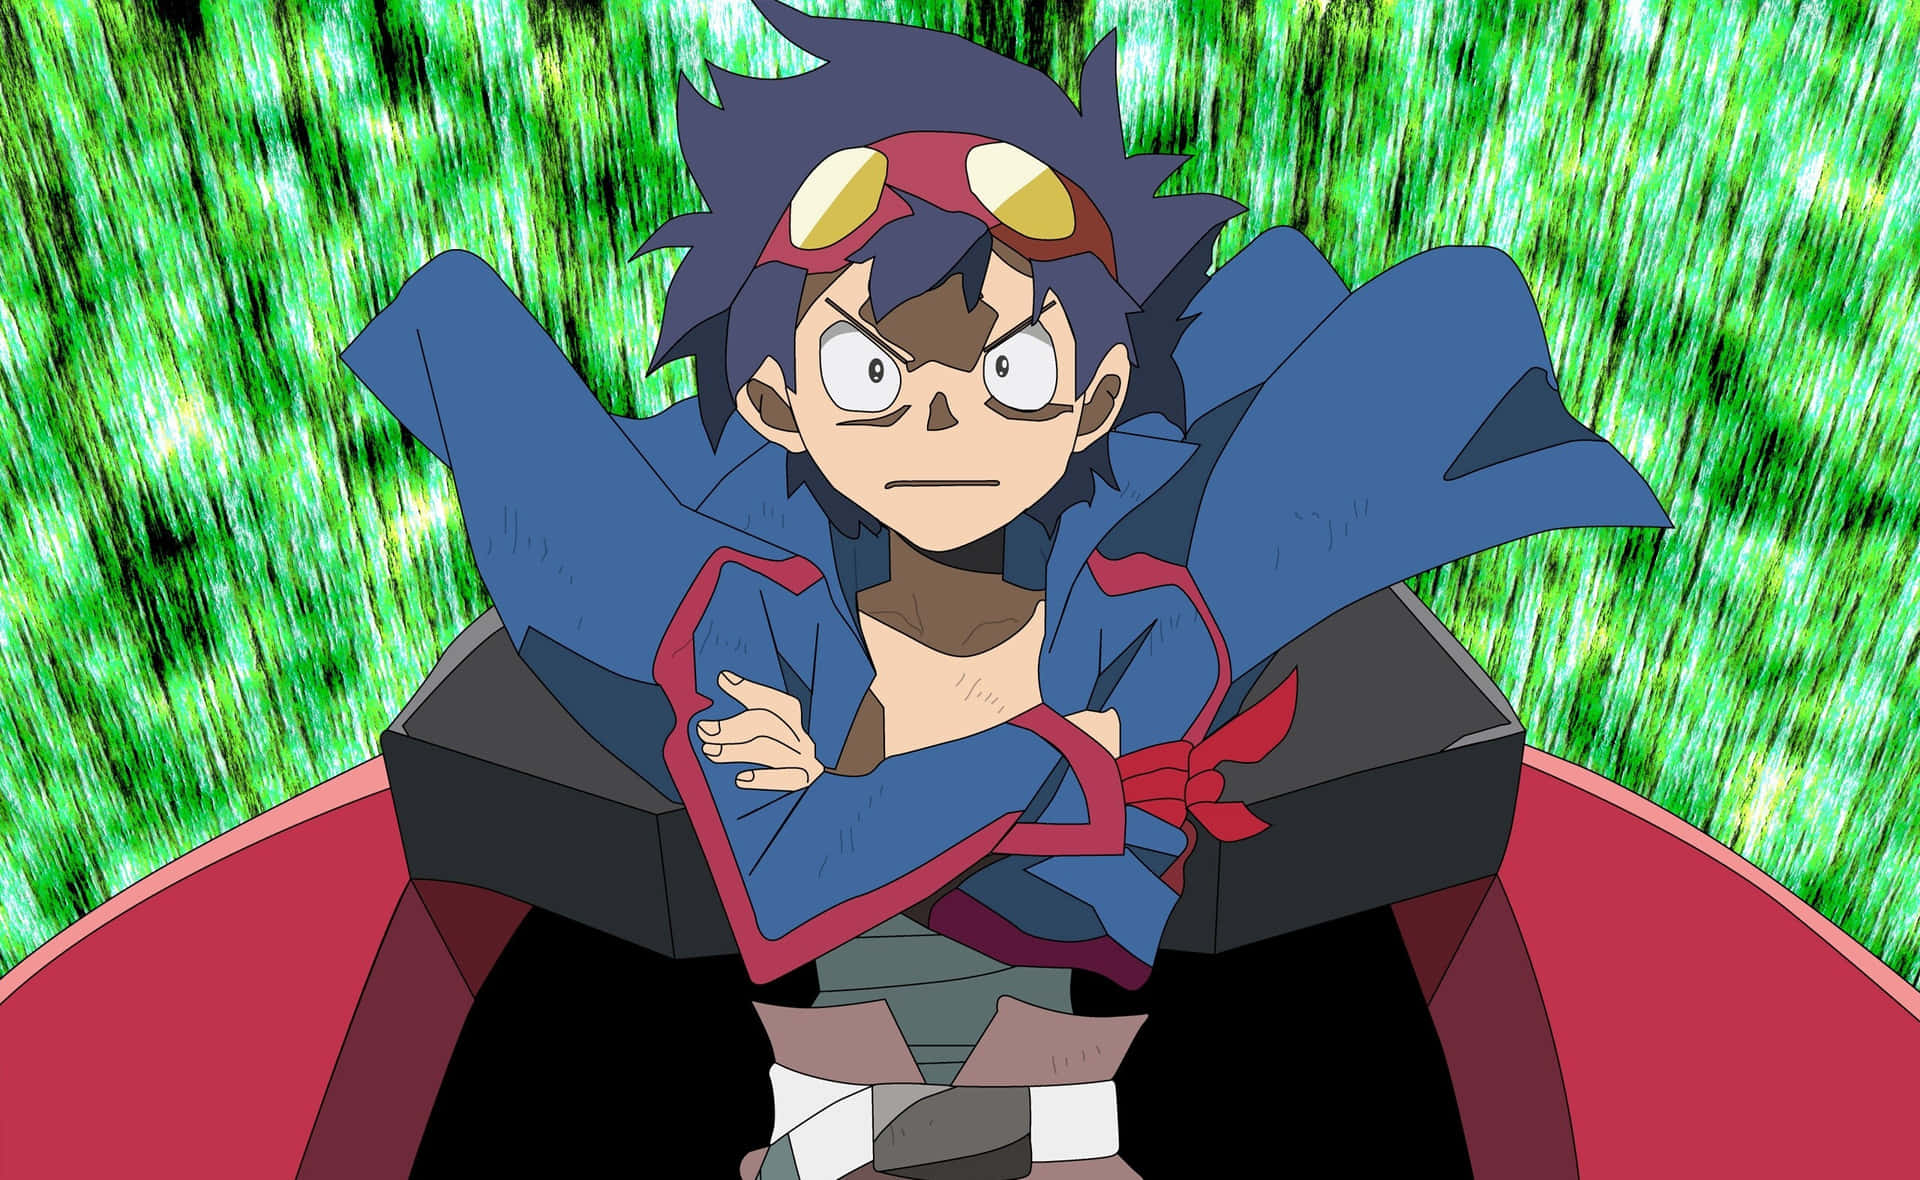 Gurren Lagann's Simon posing confidently with a determined expression Wallpaper